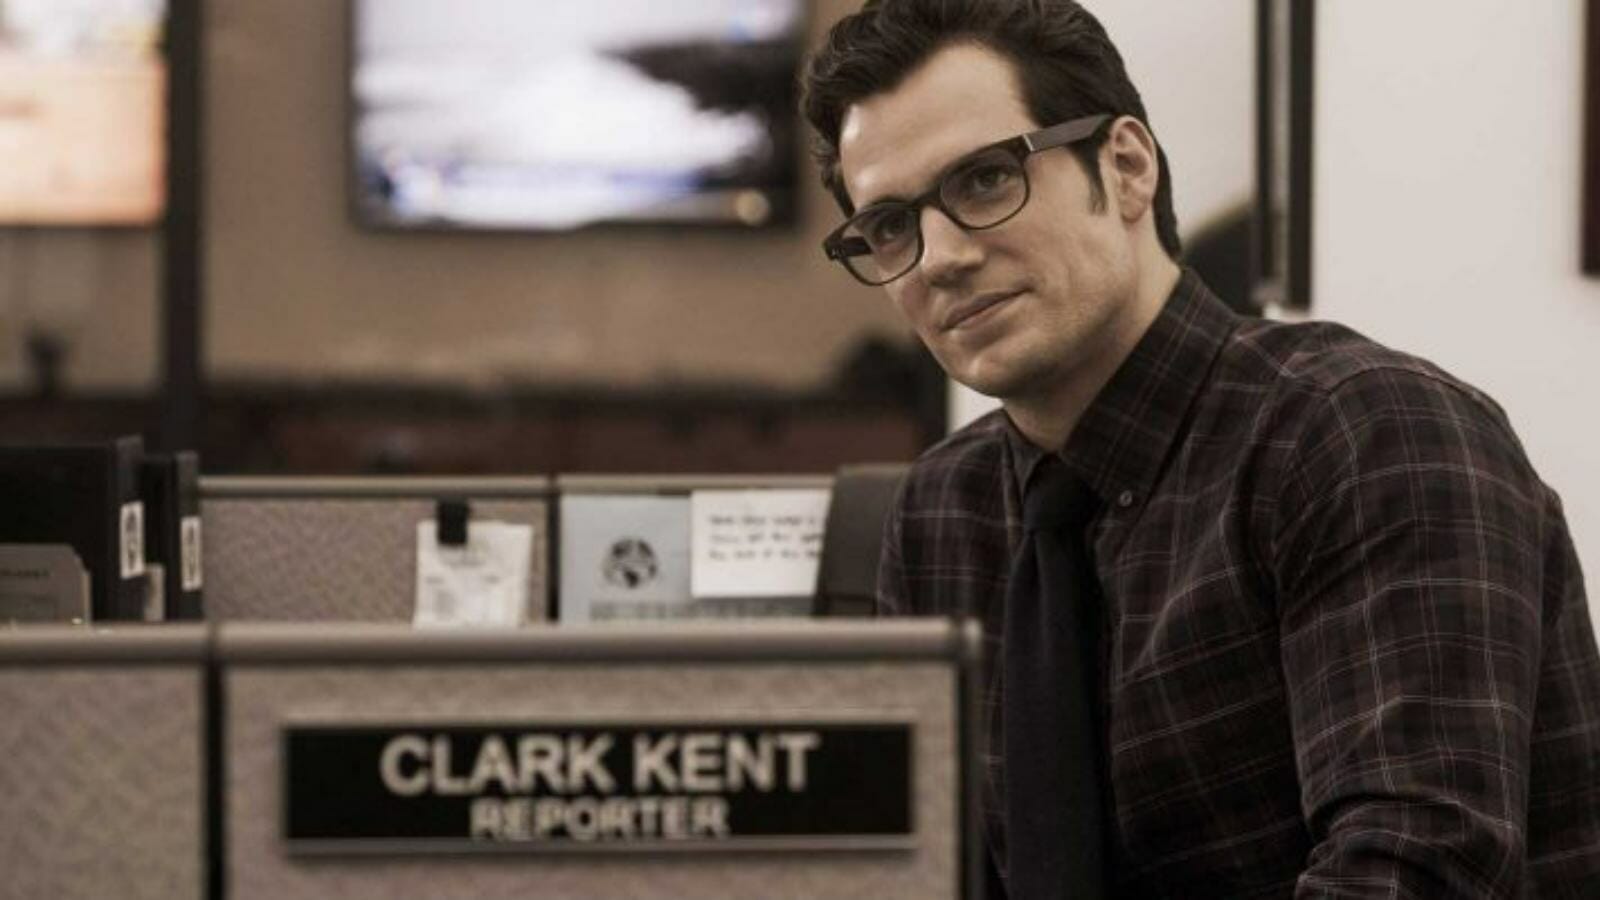 Henry as Clark Kent before he played Geralt in The Witcher